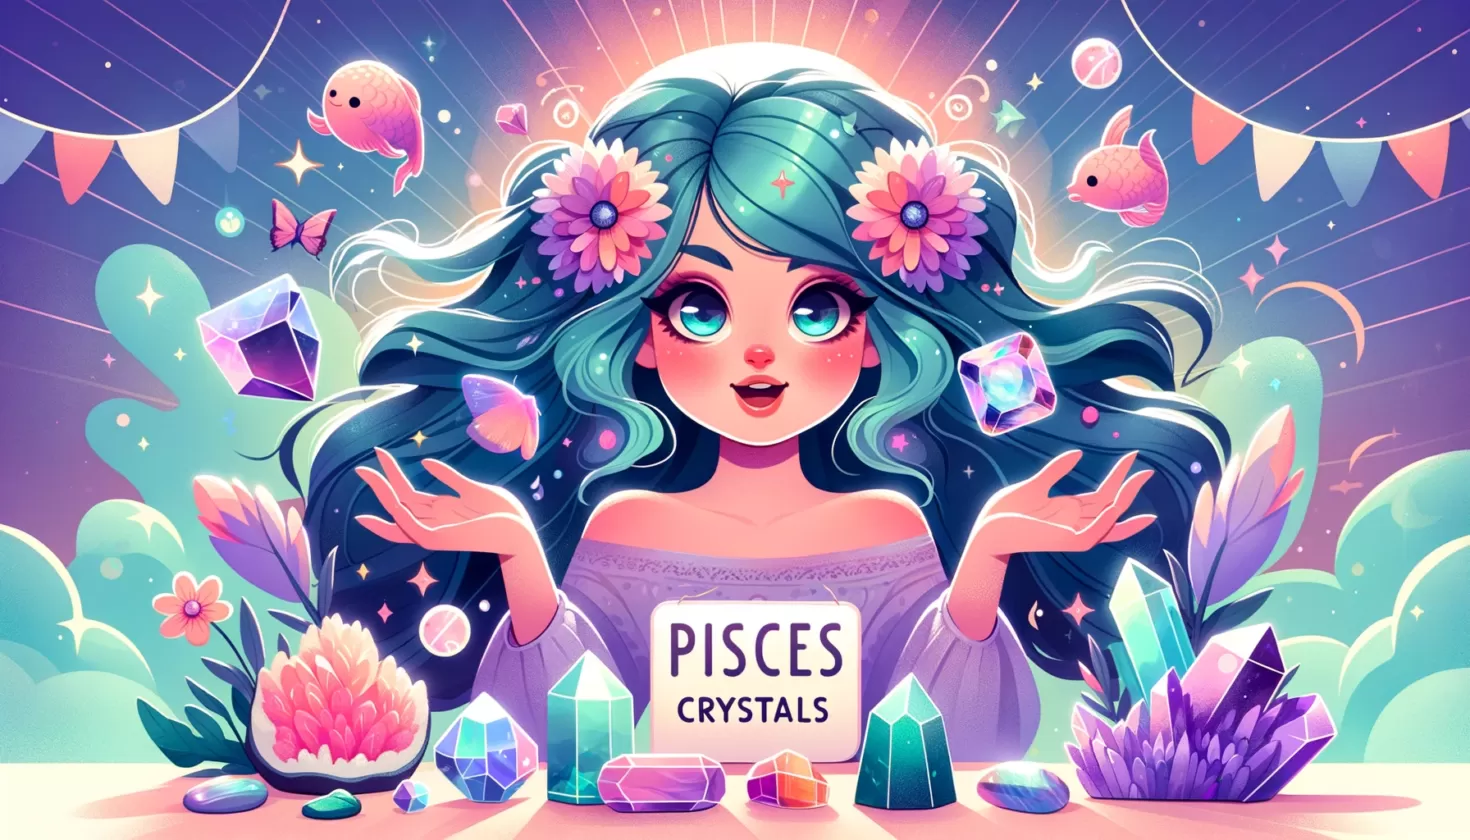 Animated Pisces Zodiac Traits with Amethyst, Aquamarine, Bloodstone - Engaging and Vibrant